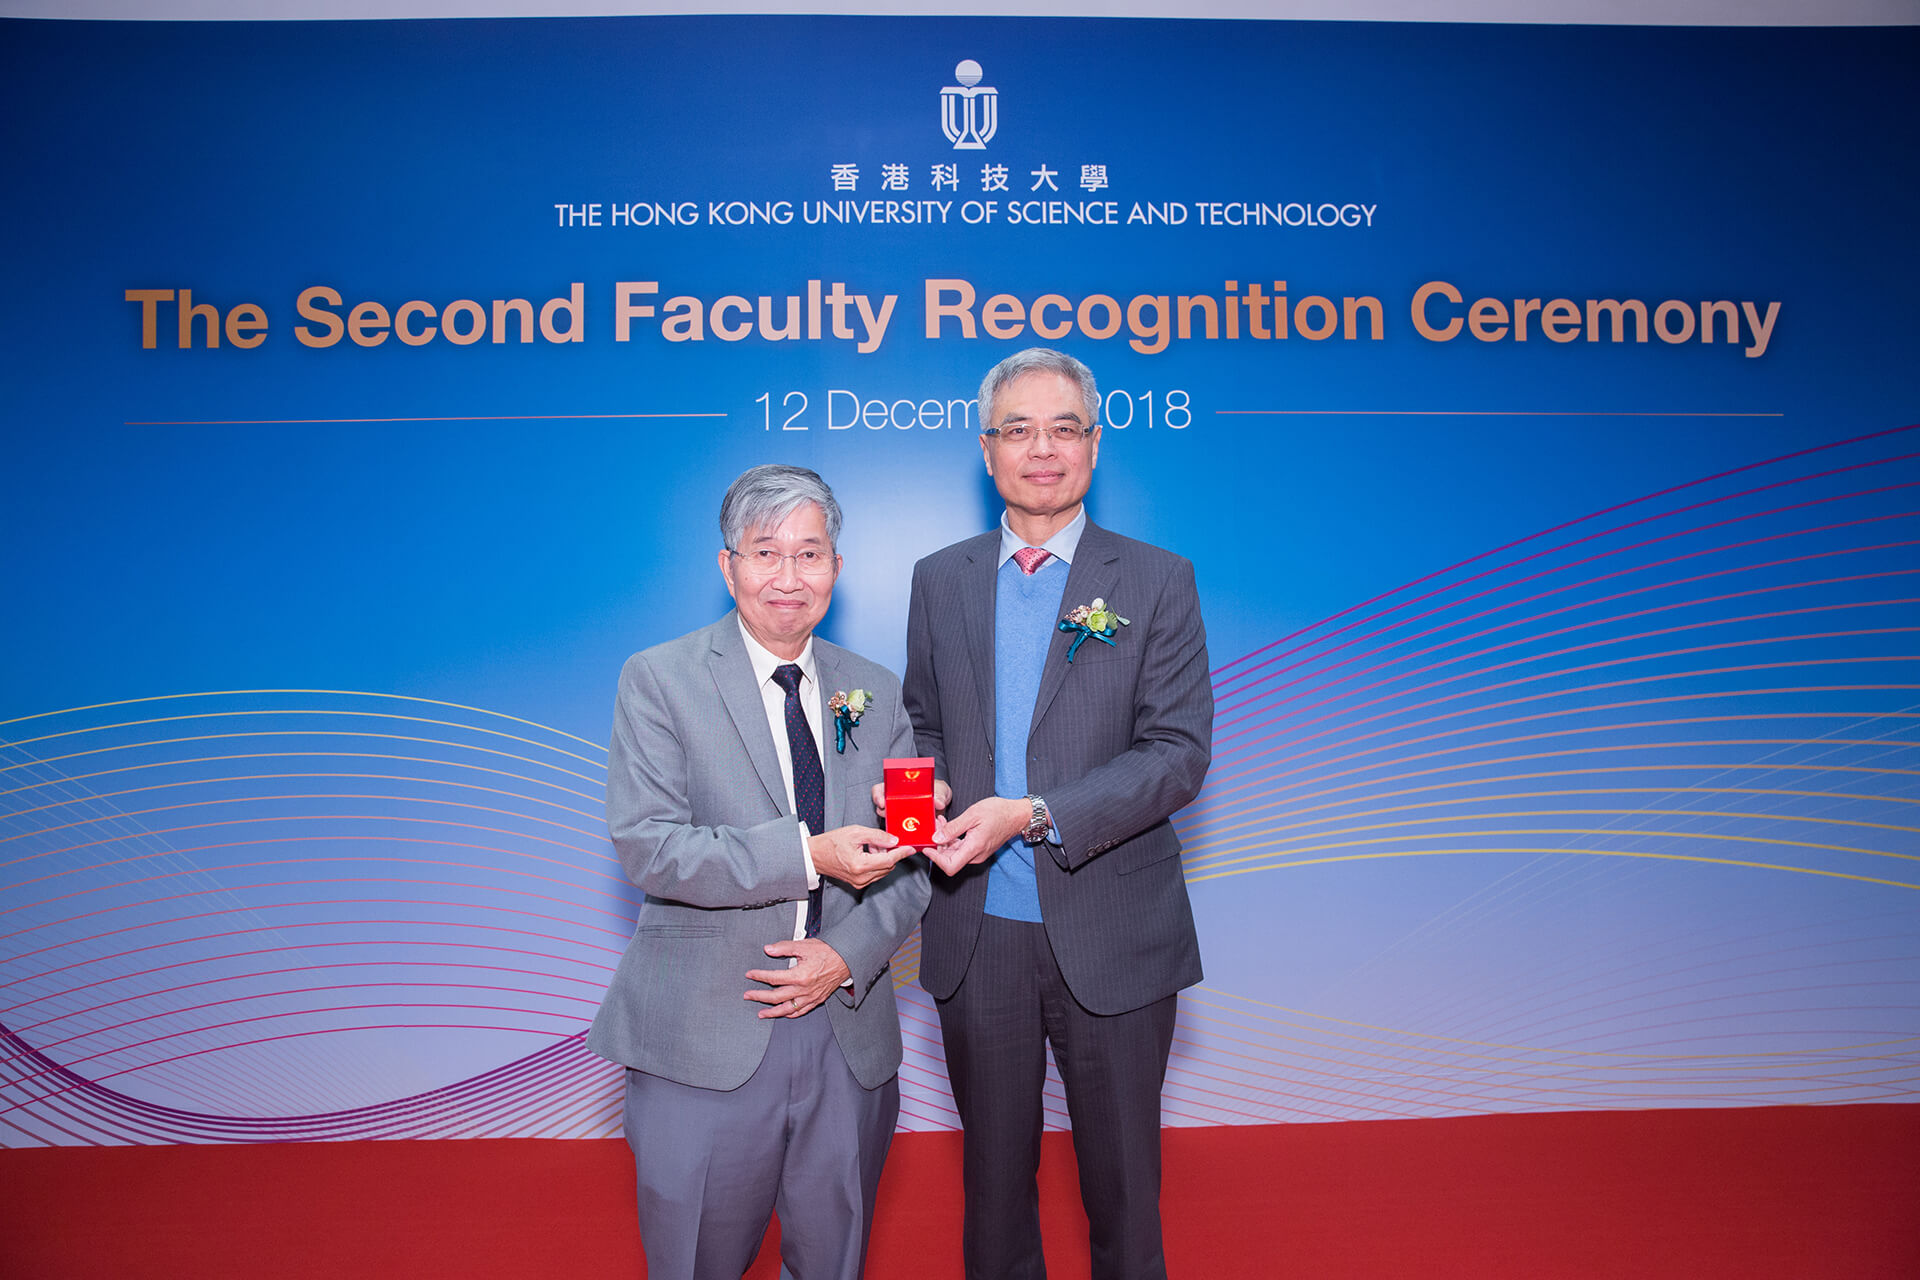 Faculty Recognition Ceremony 2018